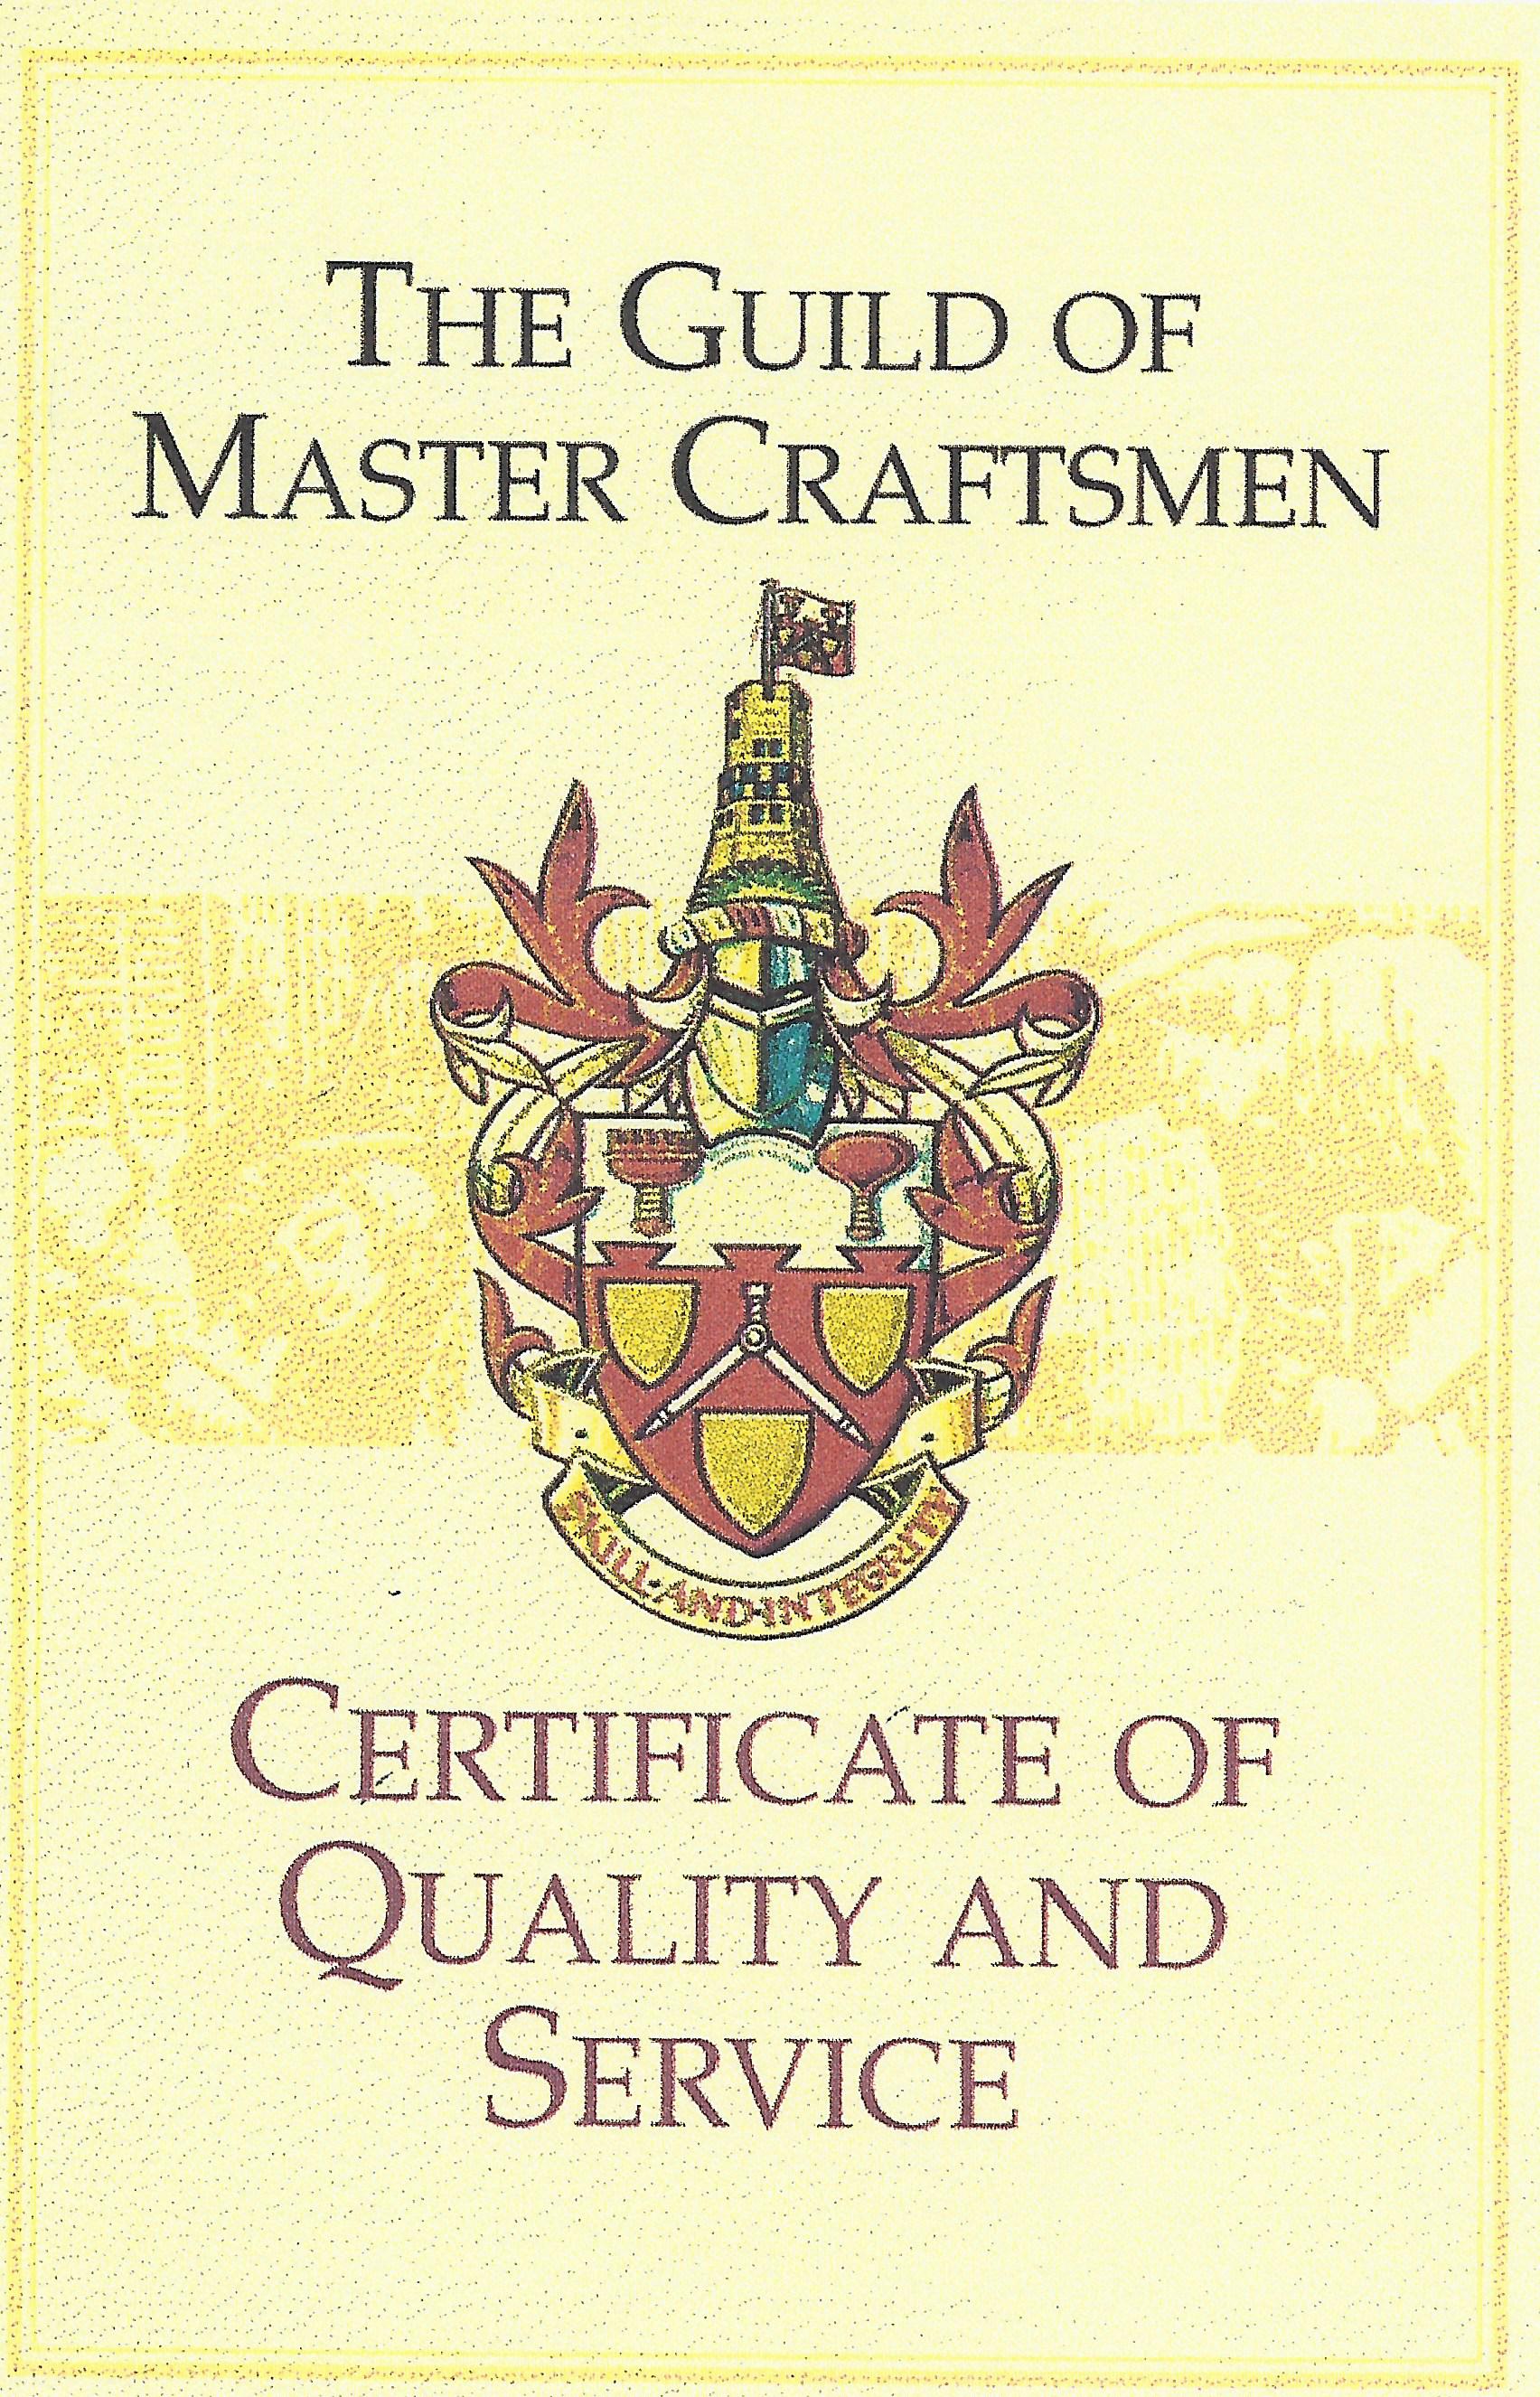 Certificate of Quality and Service